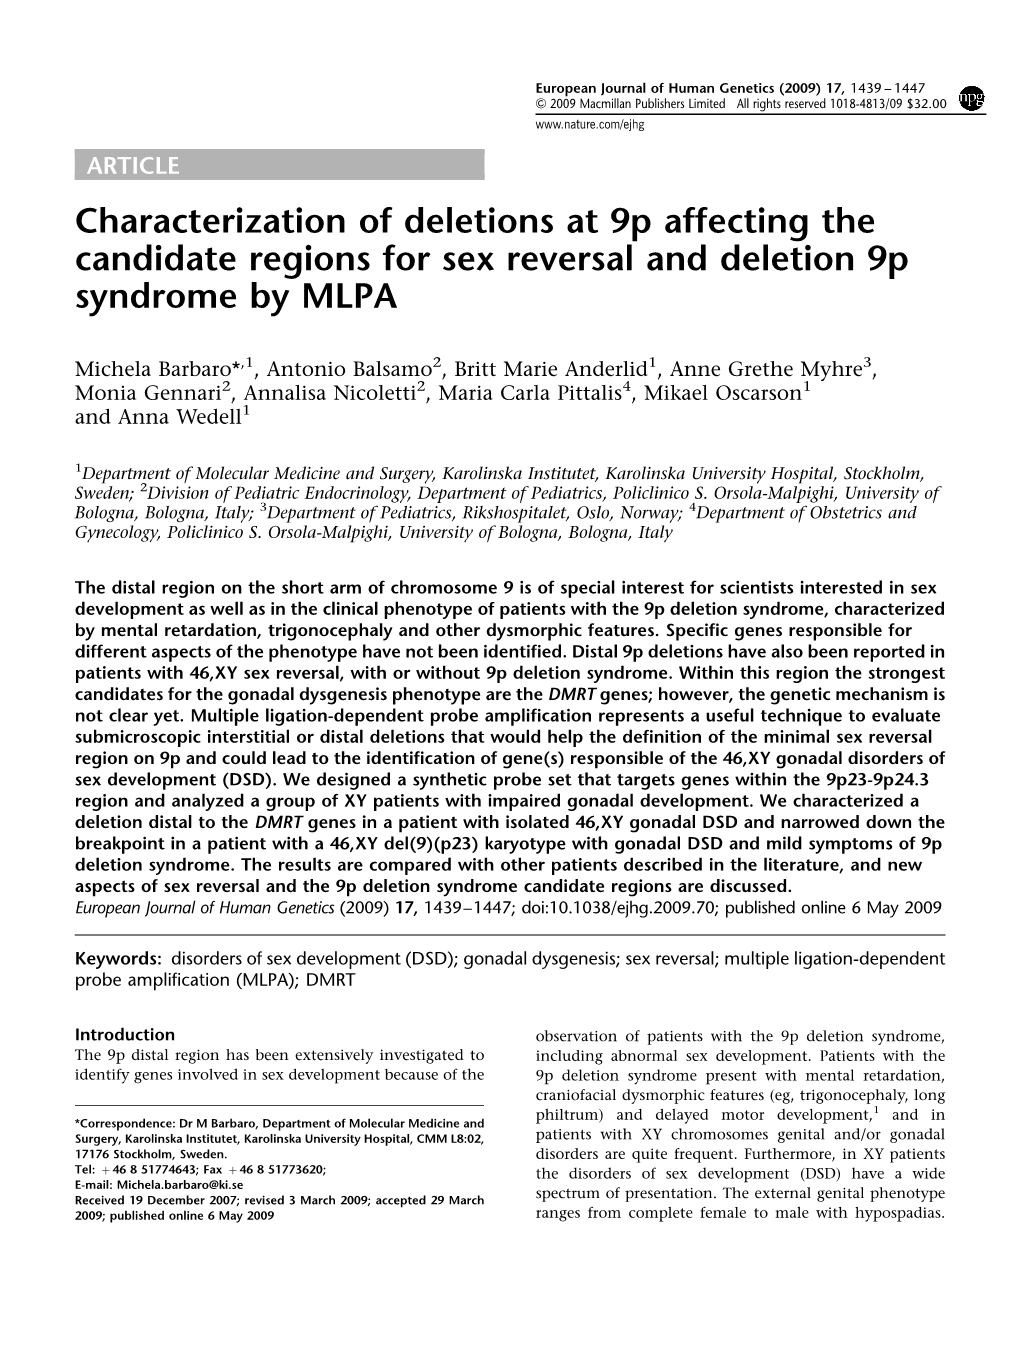 Characterization of Deletions at 9P Affecting the Candidate Regions for Sex Reversal and Deletion 9P Syndrome by MLPA